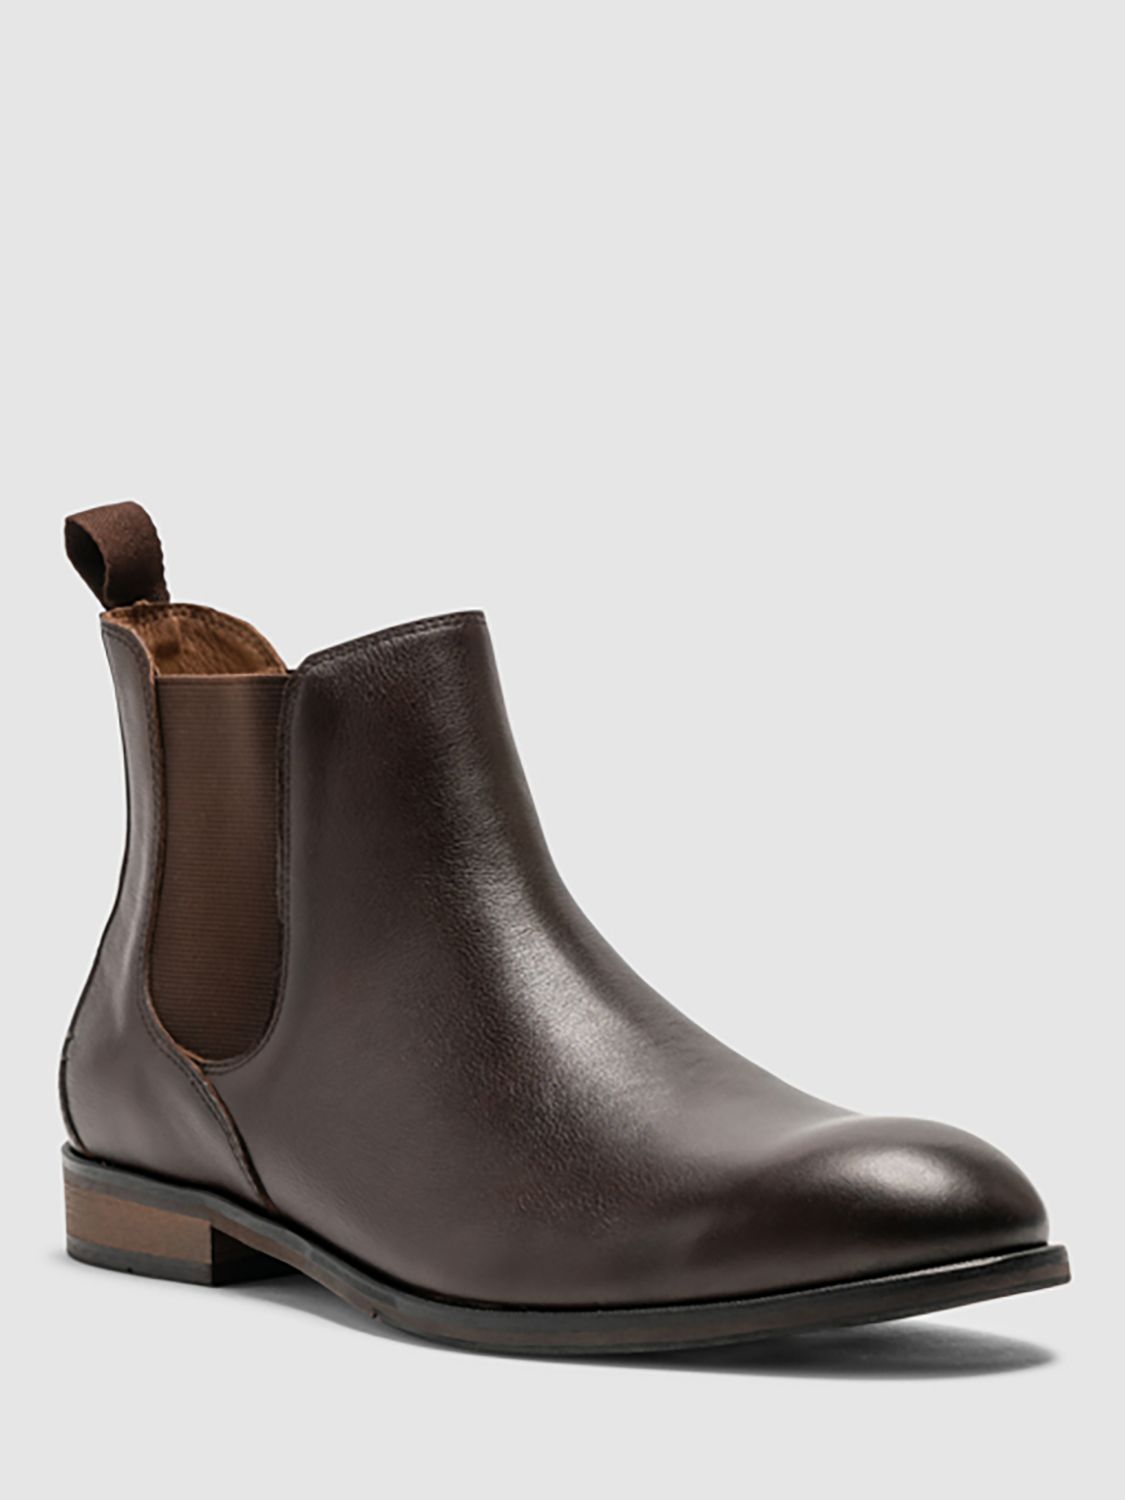 Rodd & Gunn Kingsview Road Chelsea Leather Boots, Chocolate at John ...